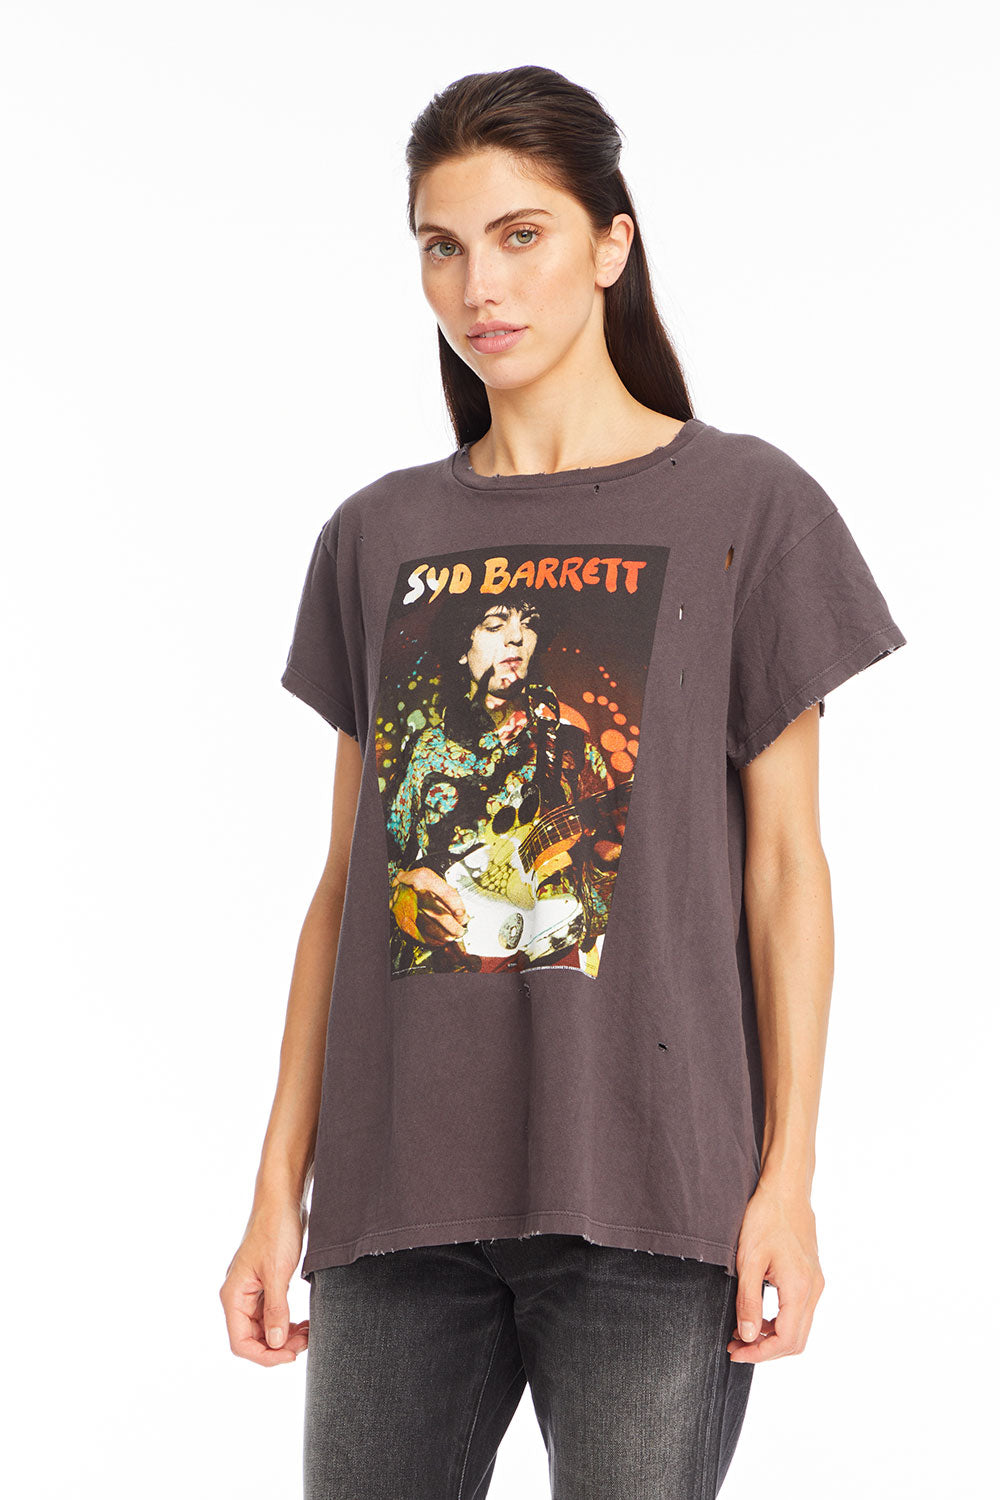 Syd Barrett - "Syd Psychedelic" Distressed Crew Neck WOMENS chaserbrand